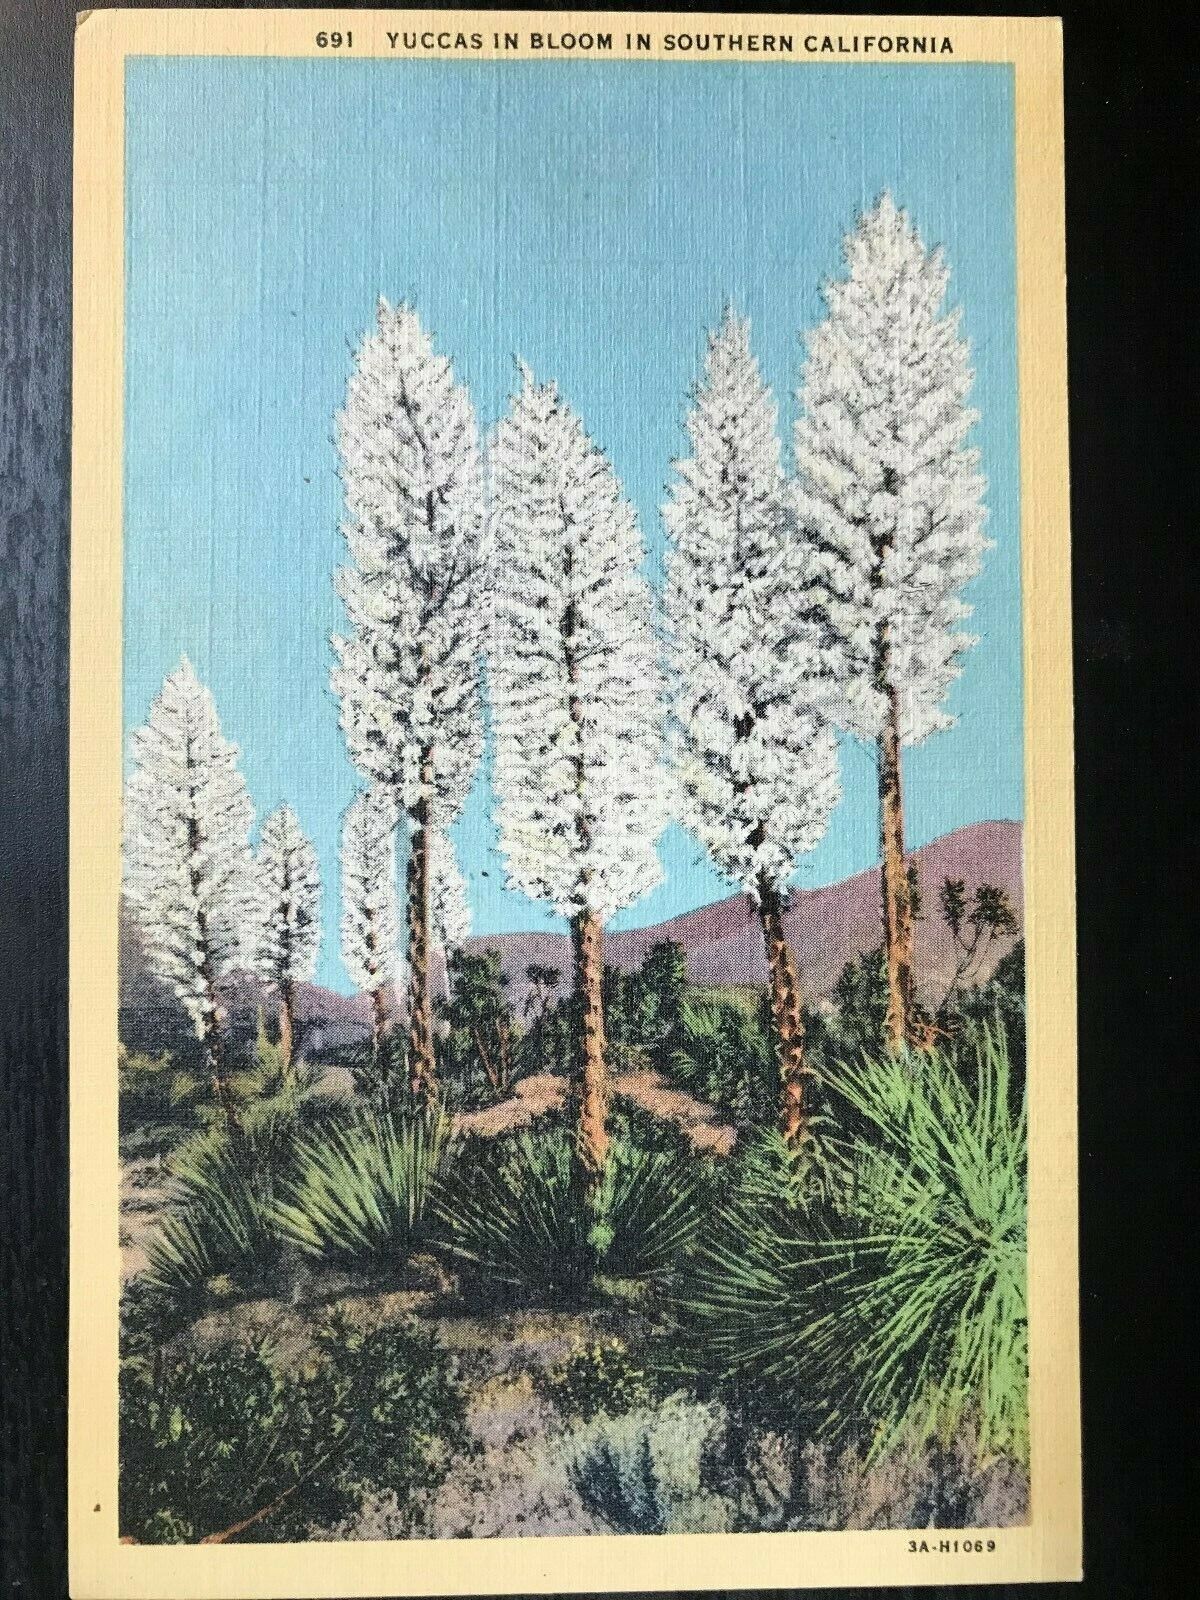 Vintage Postcard 1933 Yuccas in Bloom Southern California (CA)